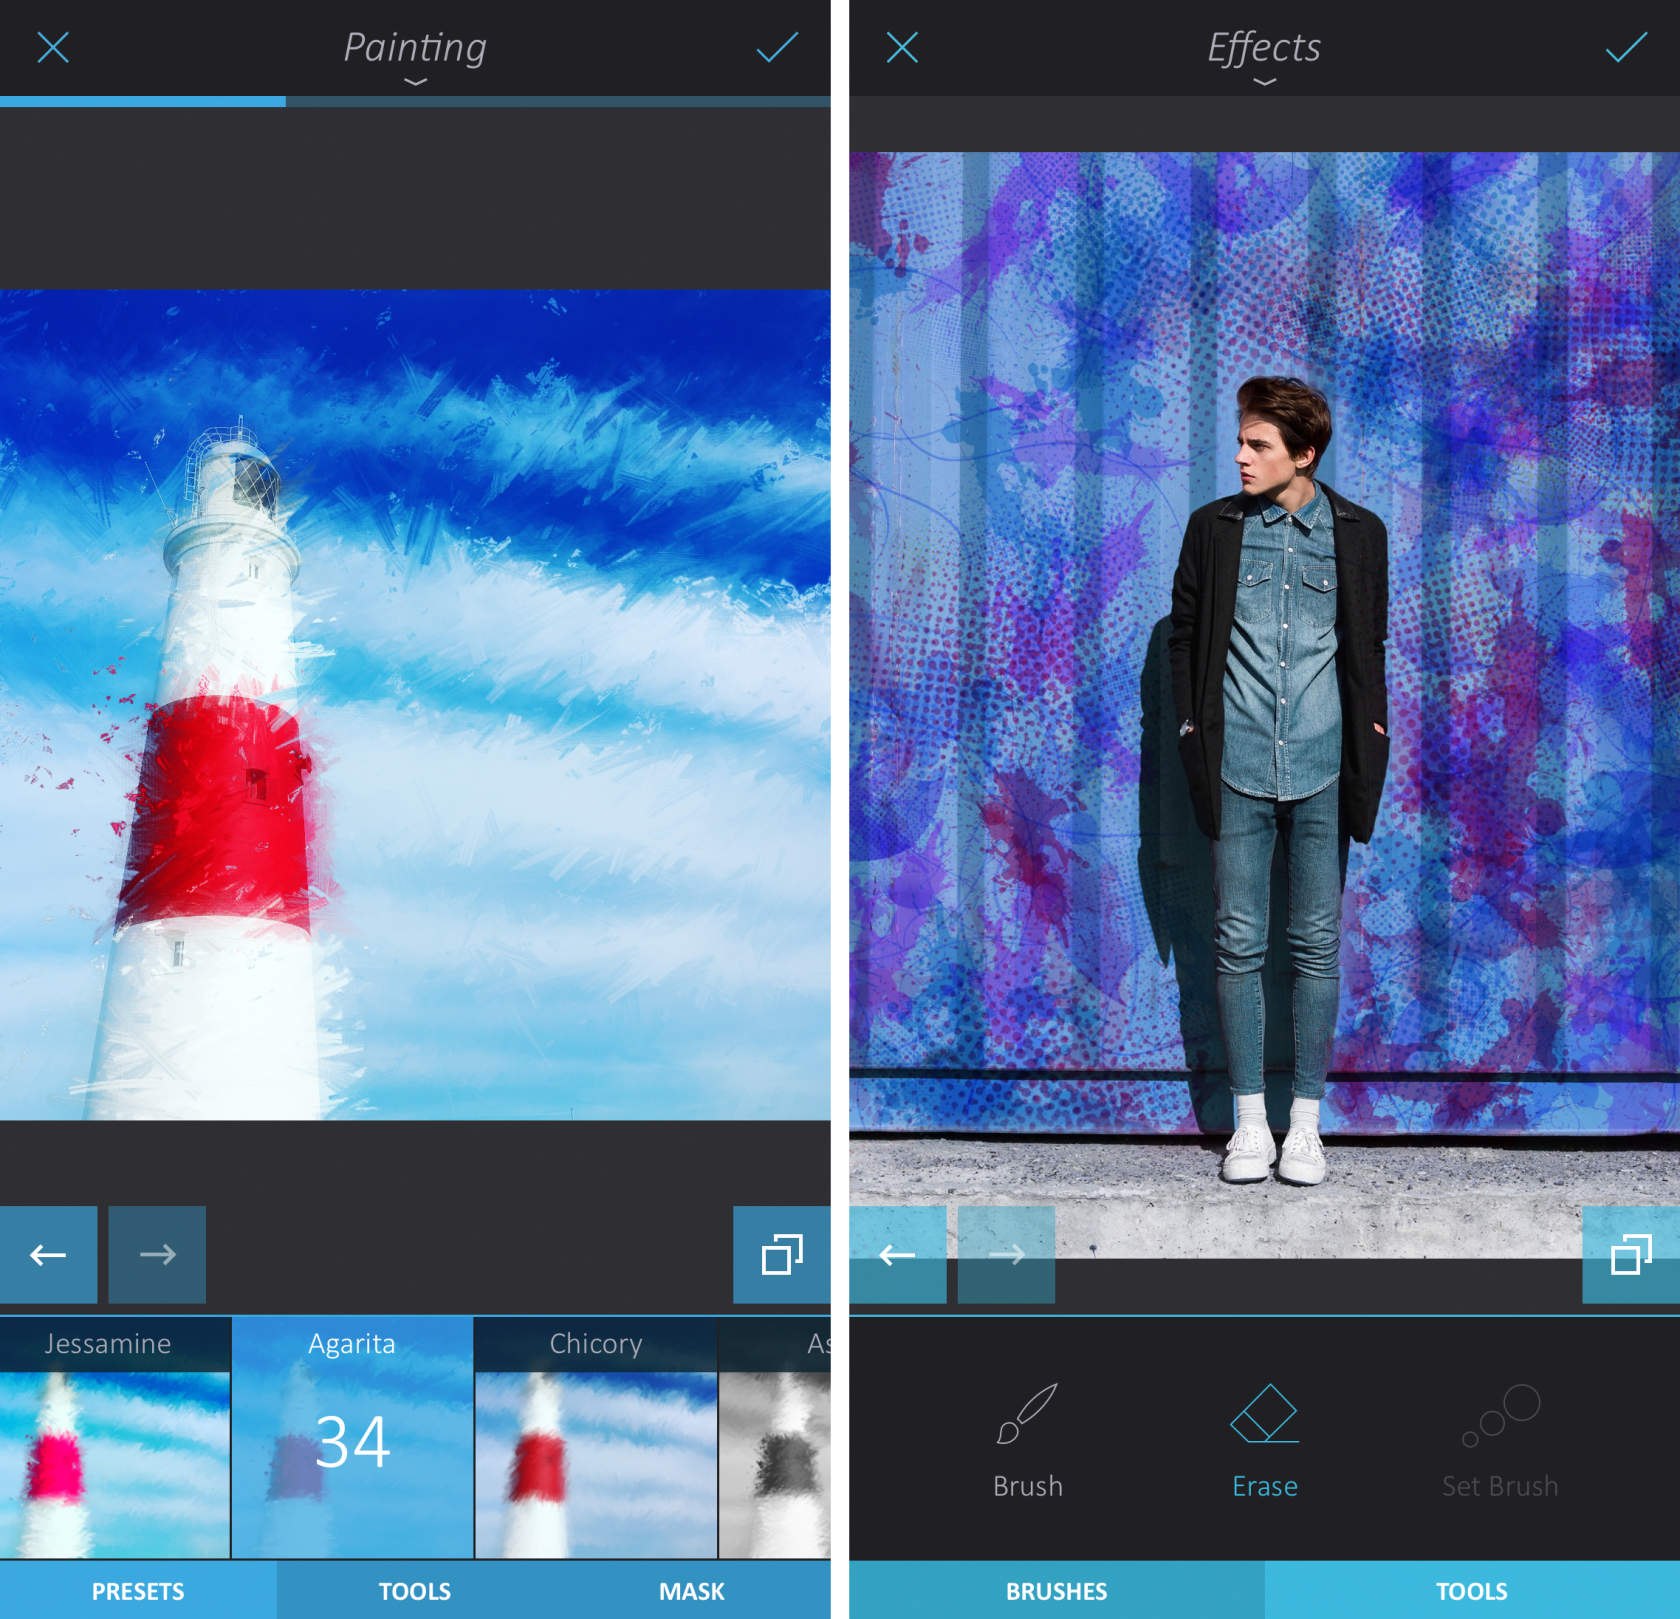 filters for photos